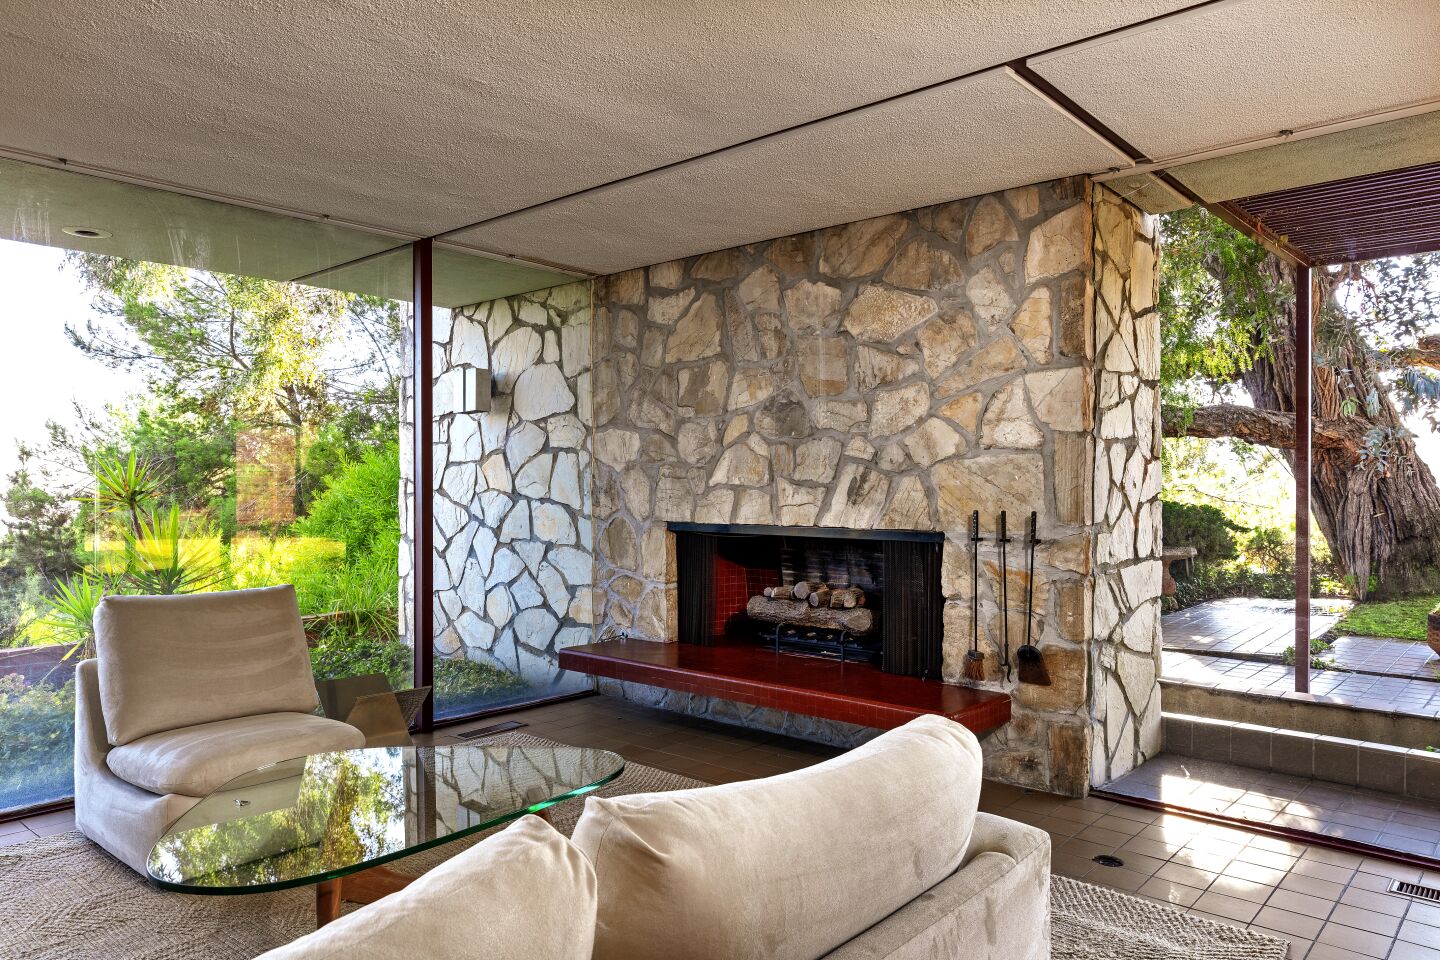 The living room’s Palos Verde stone-clad fireplace continues through the glass creating a second outdoor patio hearth anchored by three ancient eucalyptus.